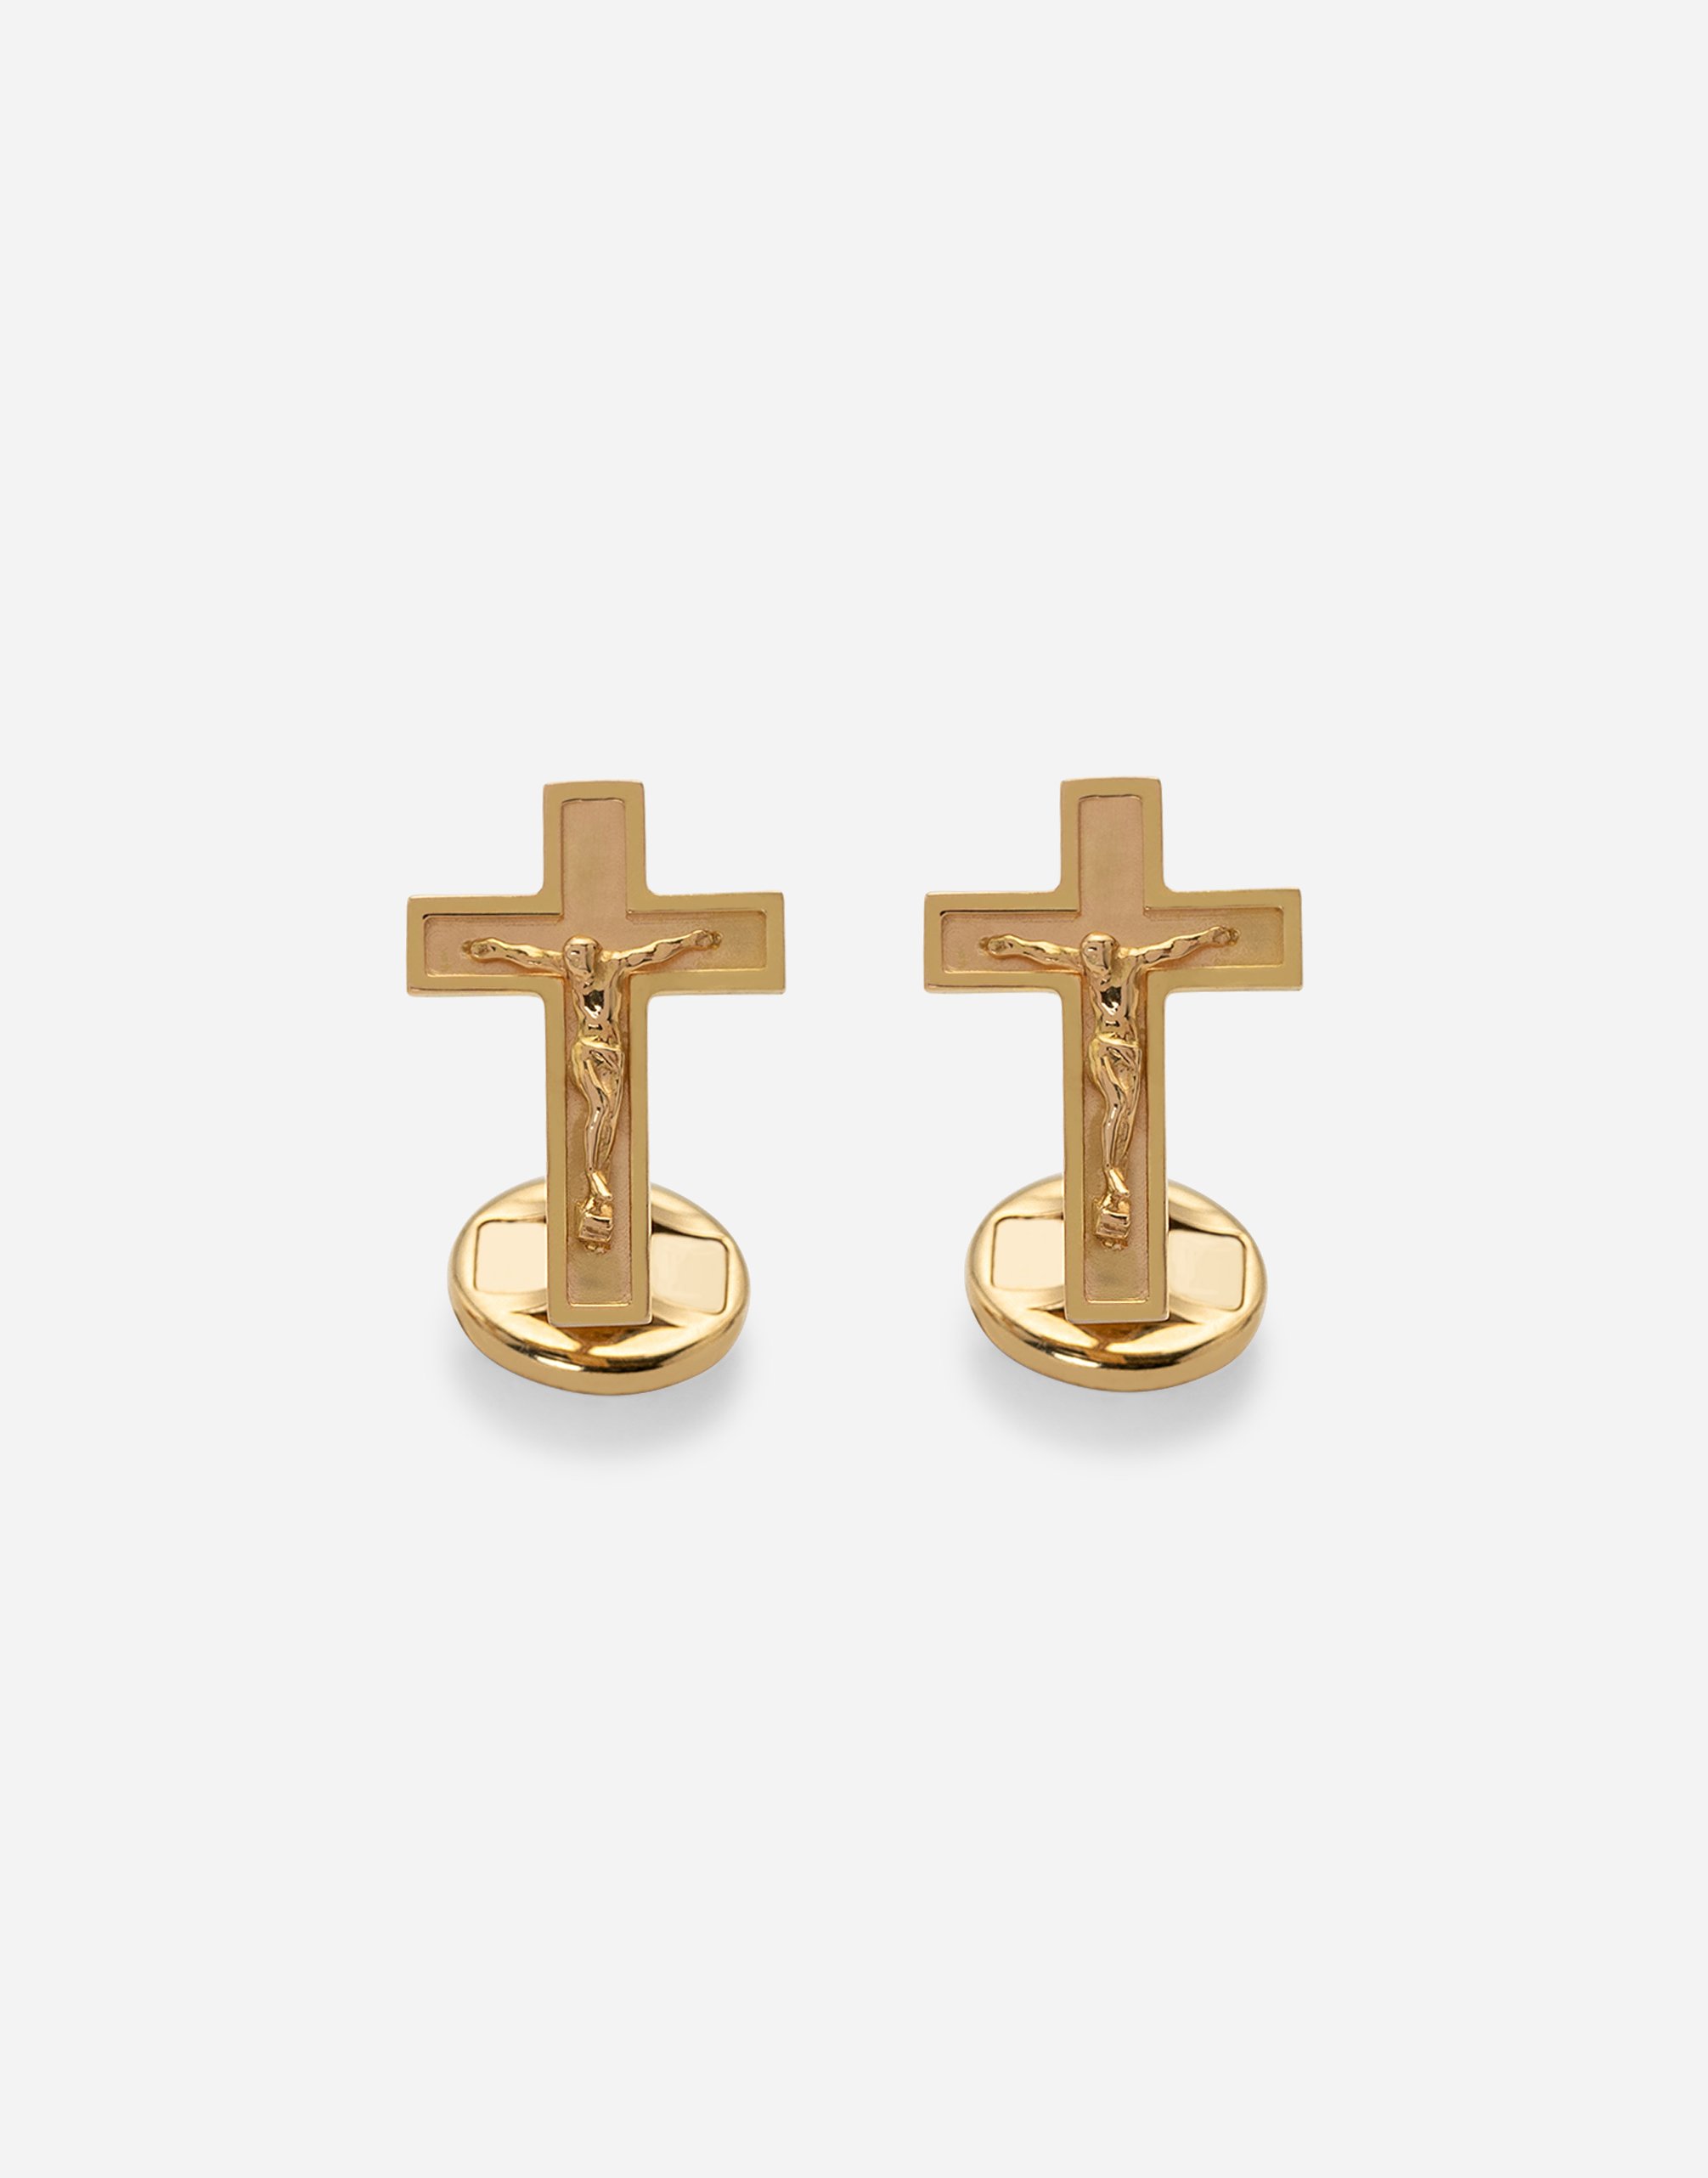 Sicily yellow gold cufflinks featuring a cross in Gold